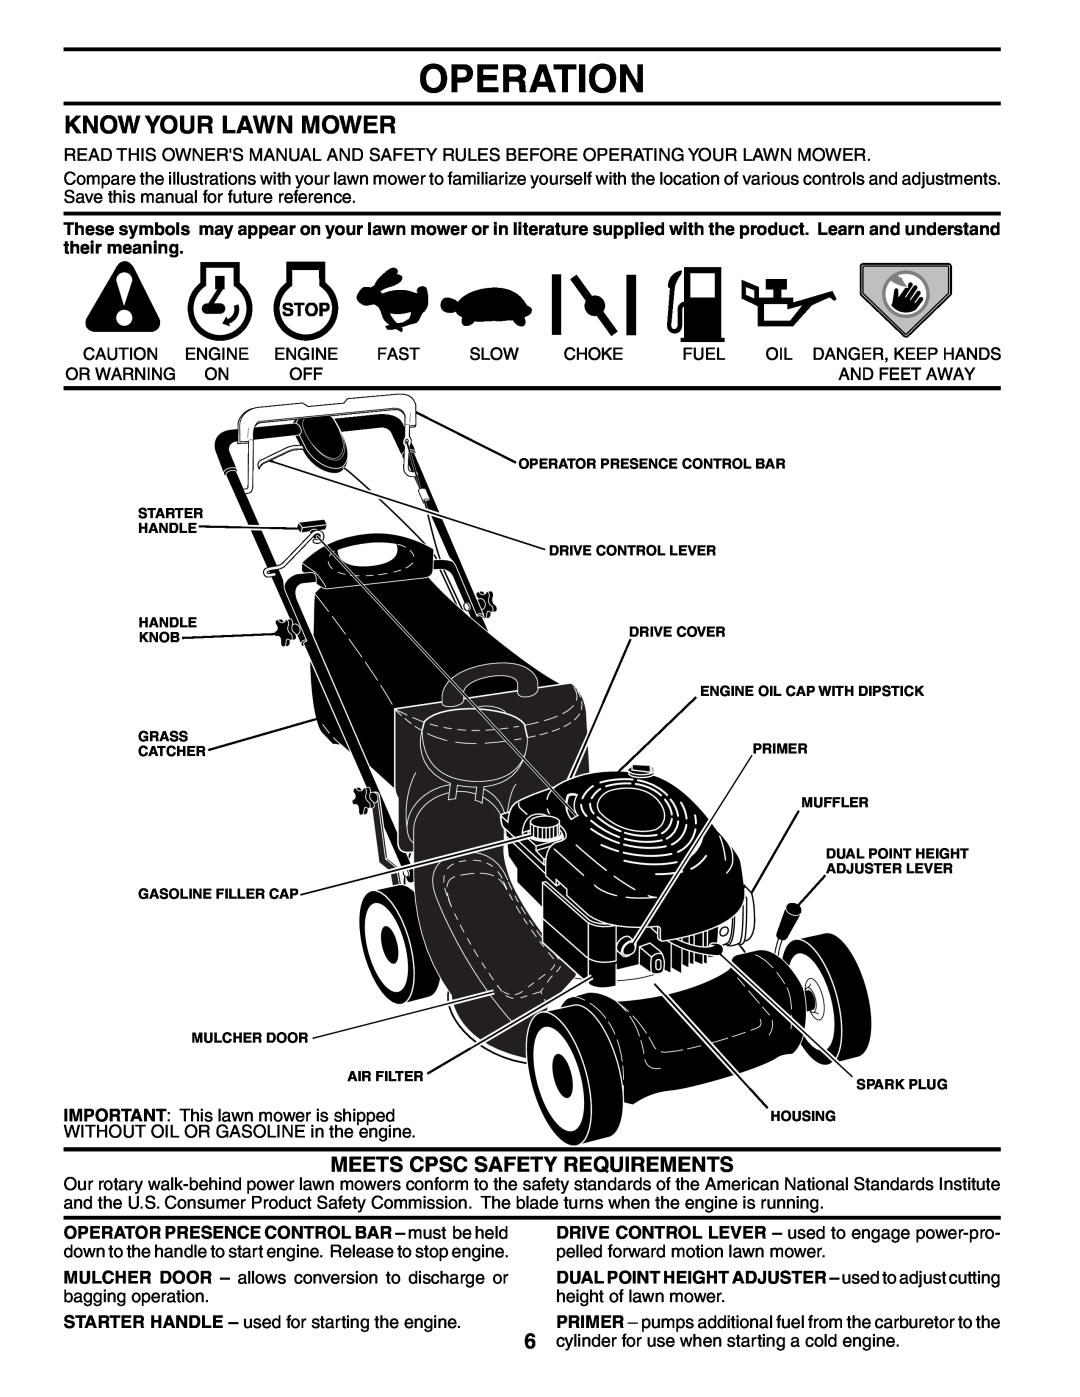 Husqvarna 917.37594 owner manual Operation, Know Your Lawn Mower, Meets Cpsc Safety Requirements 